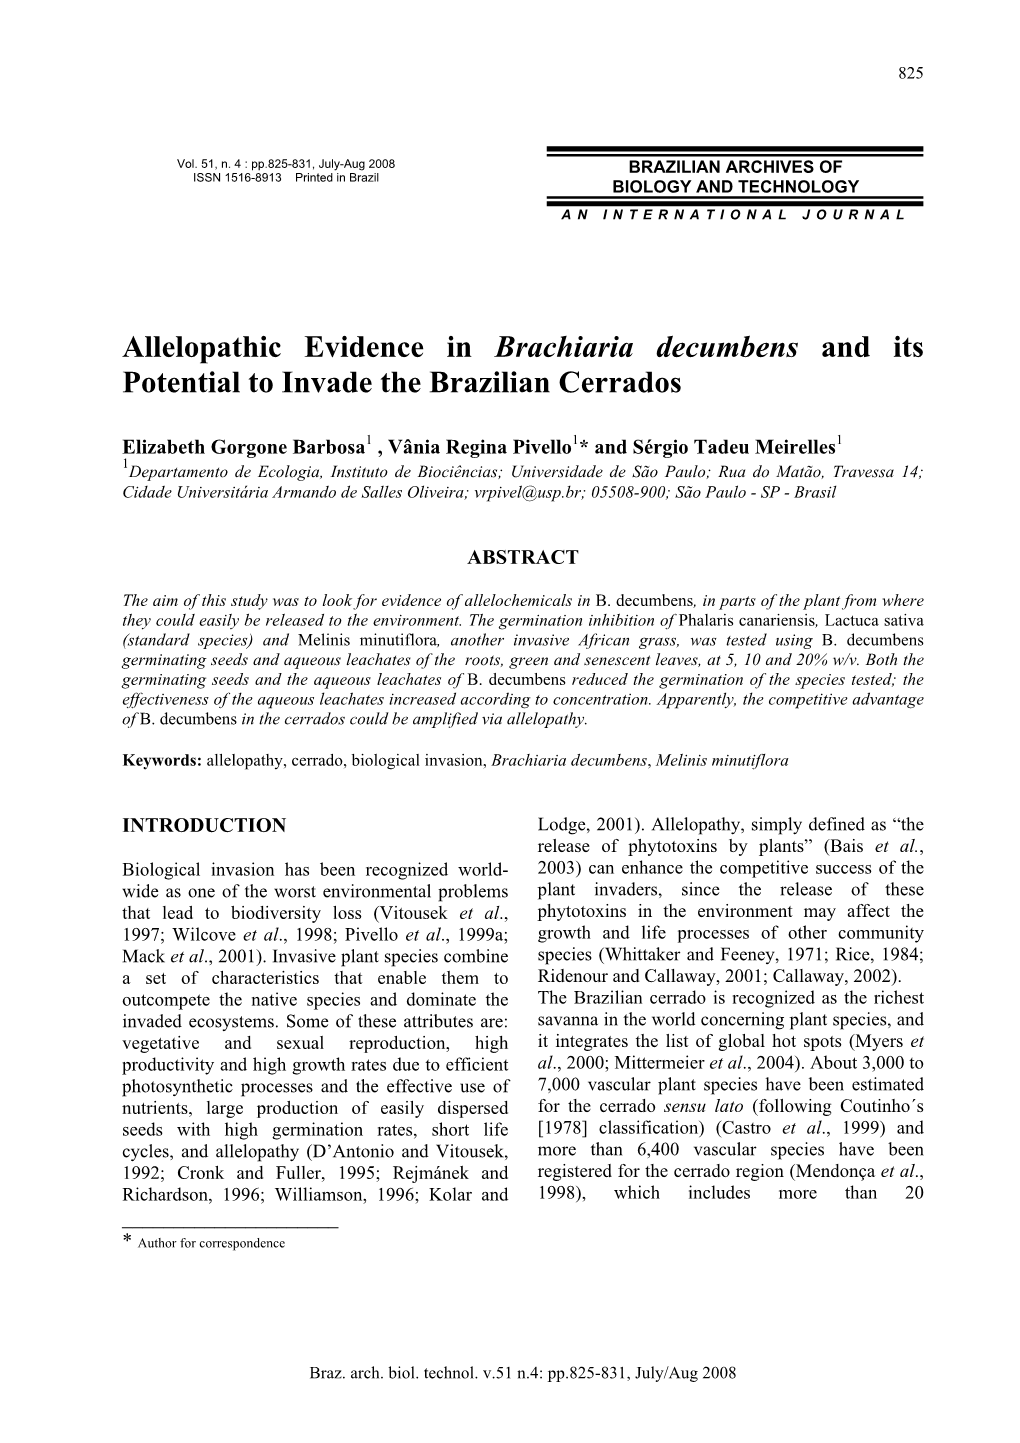 Allelopathic Evidence in Brachiaria Decumbens and Its Potential to Invade the Brazilian Cerrados